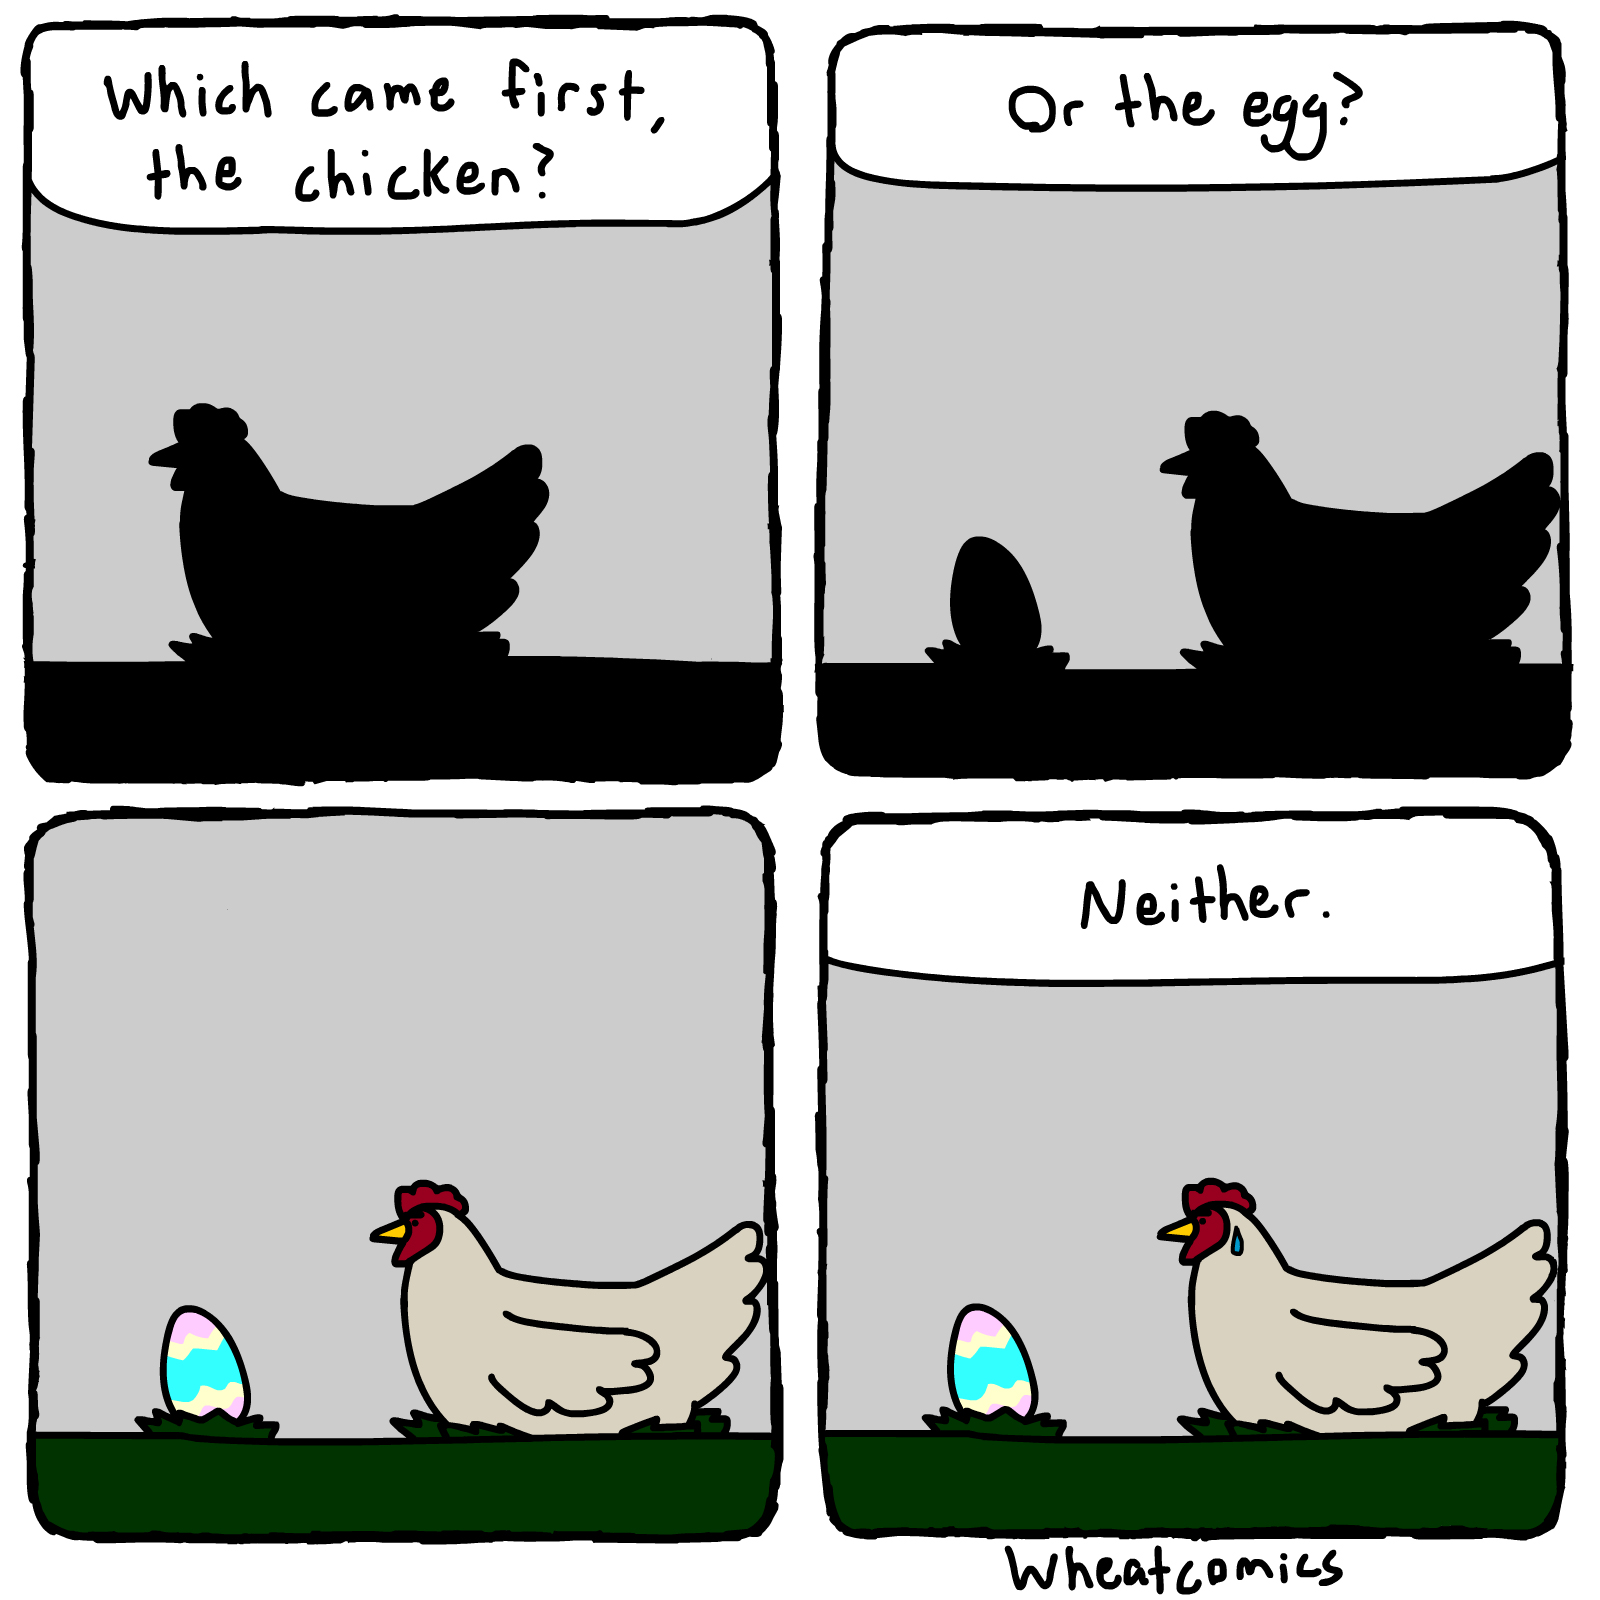 Which Came First?